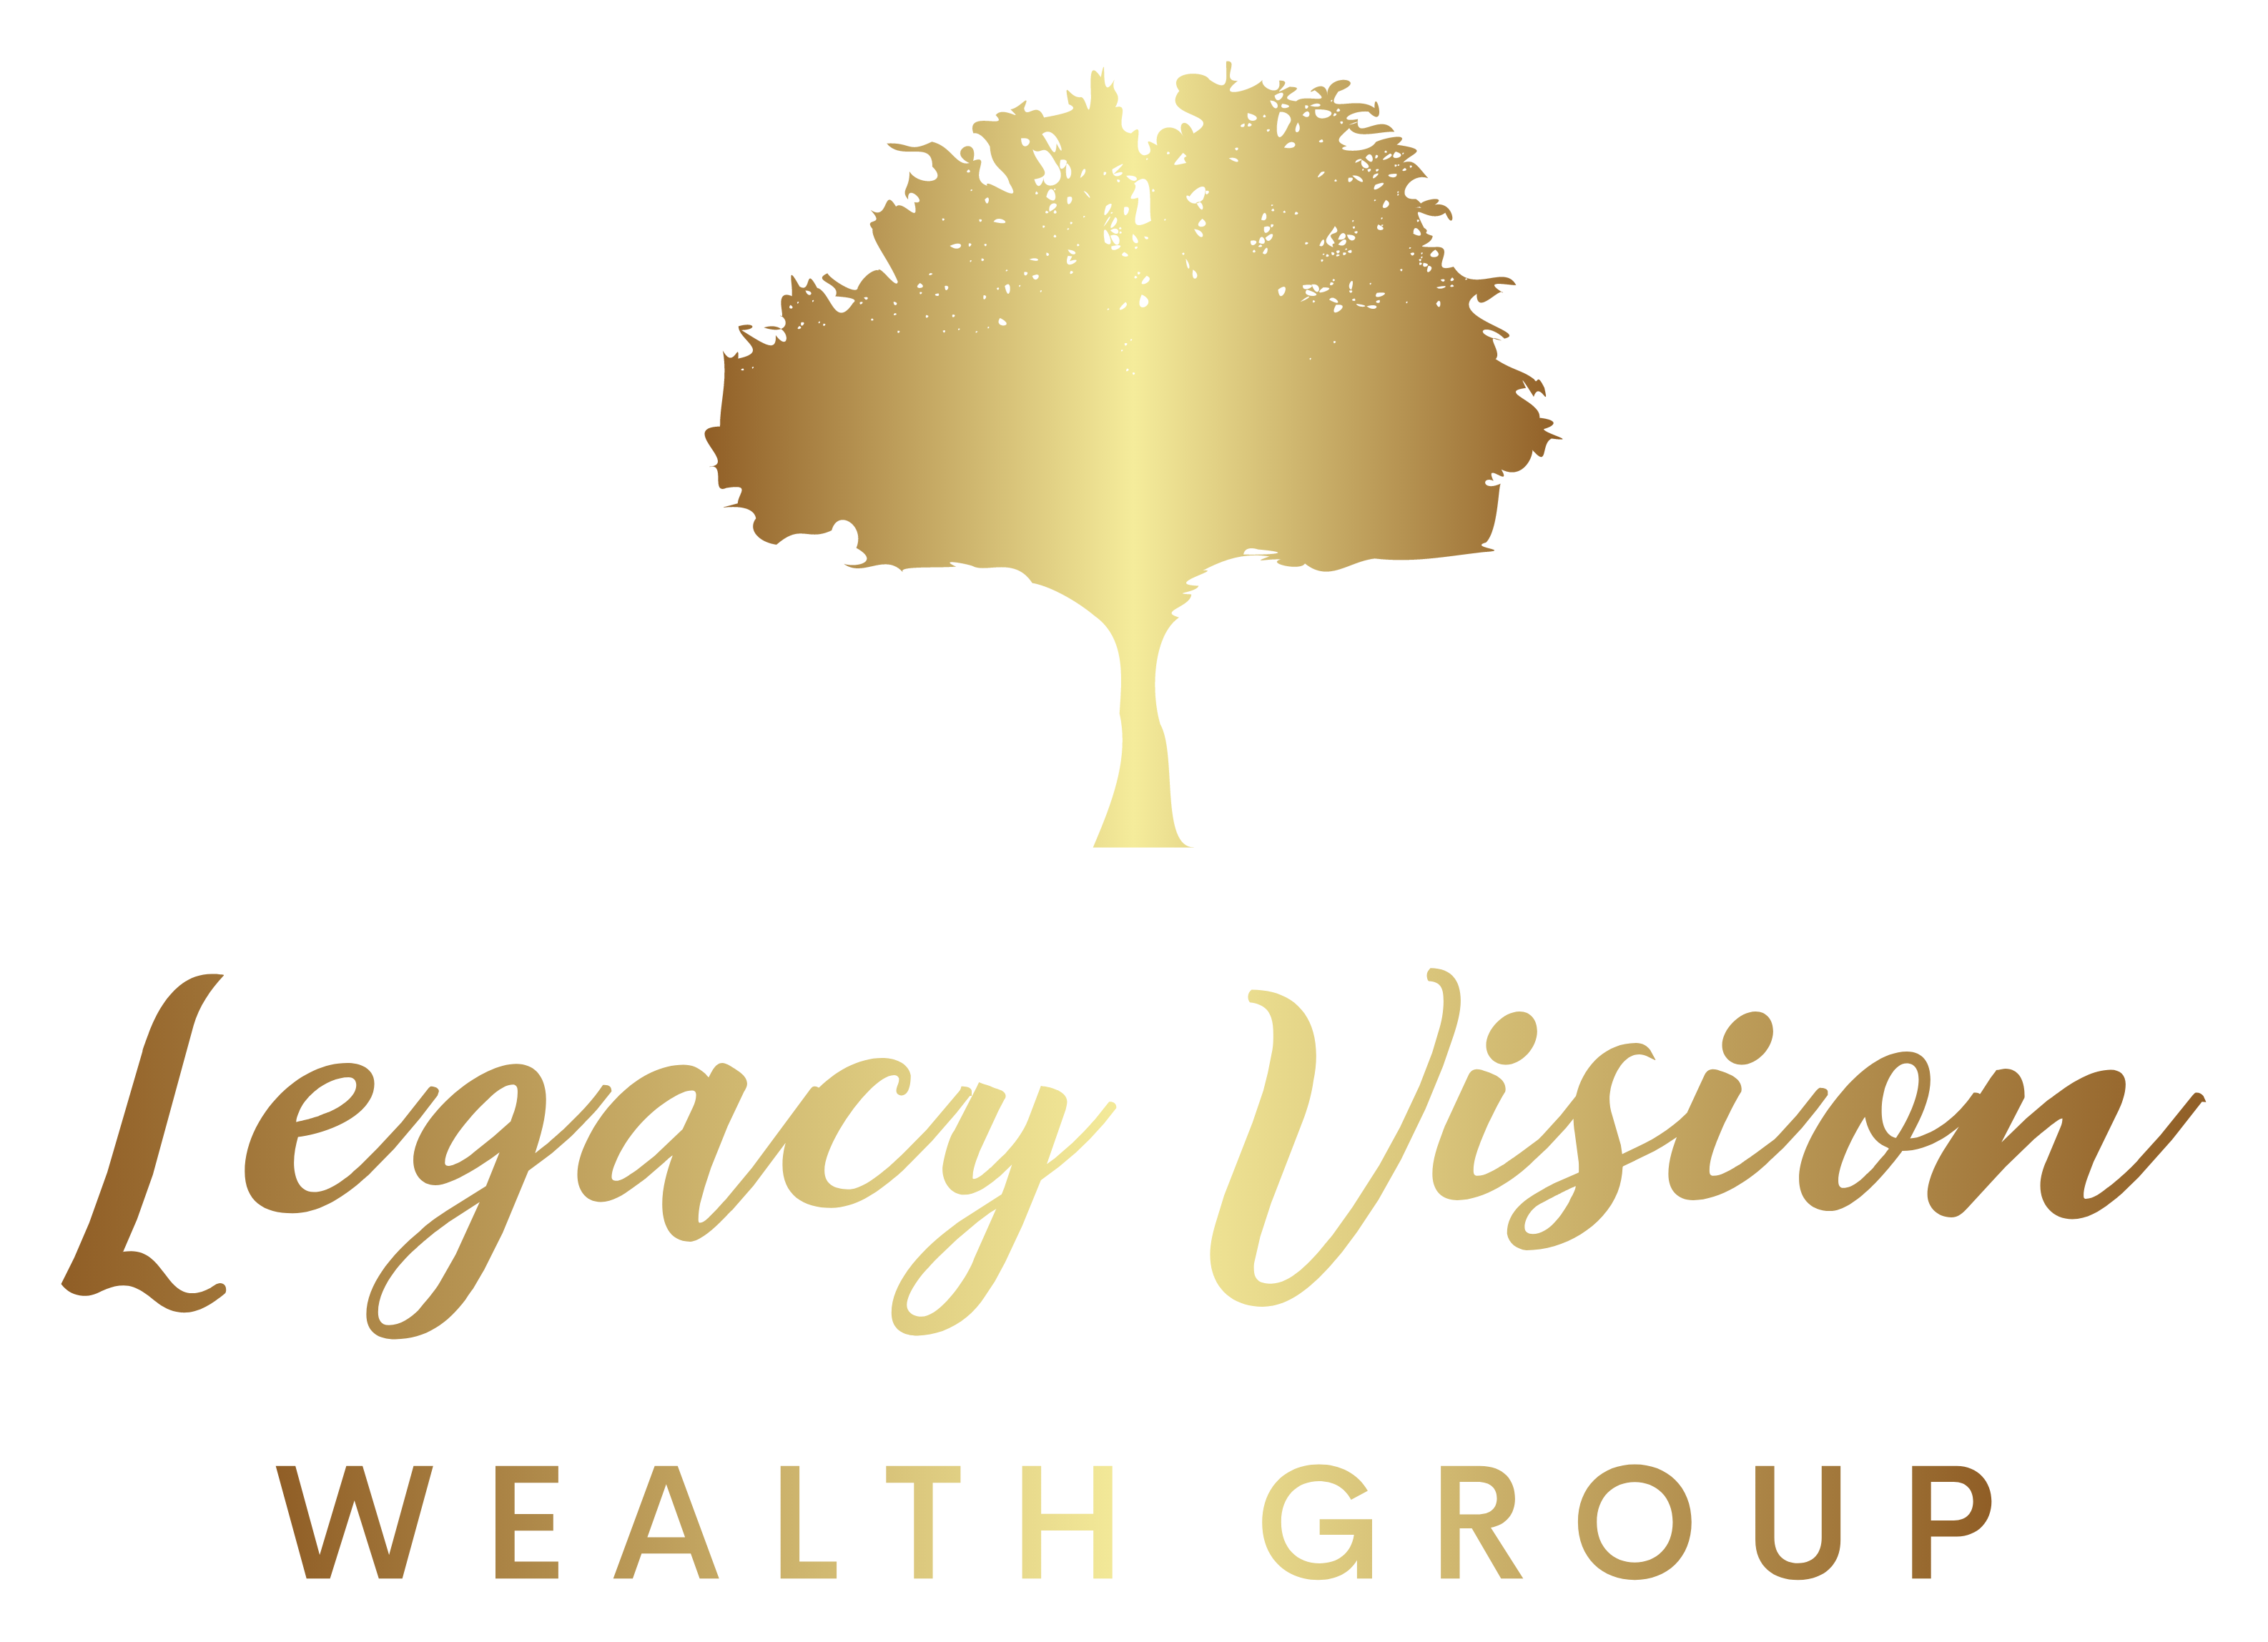 LegacyVision Wealth Group Logo